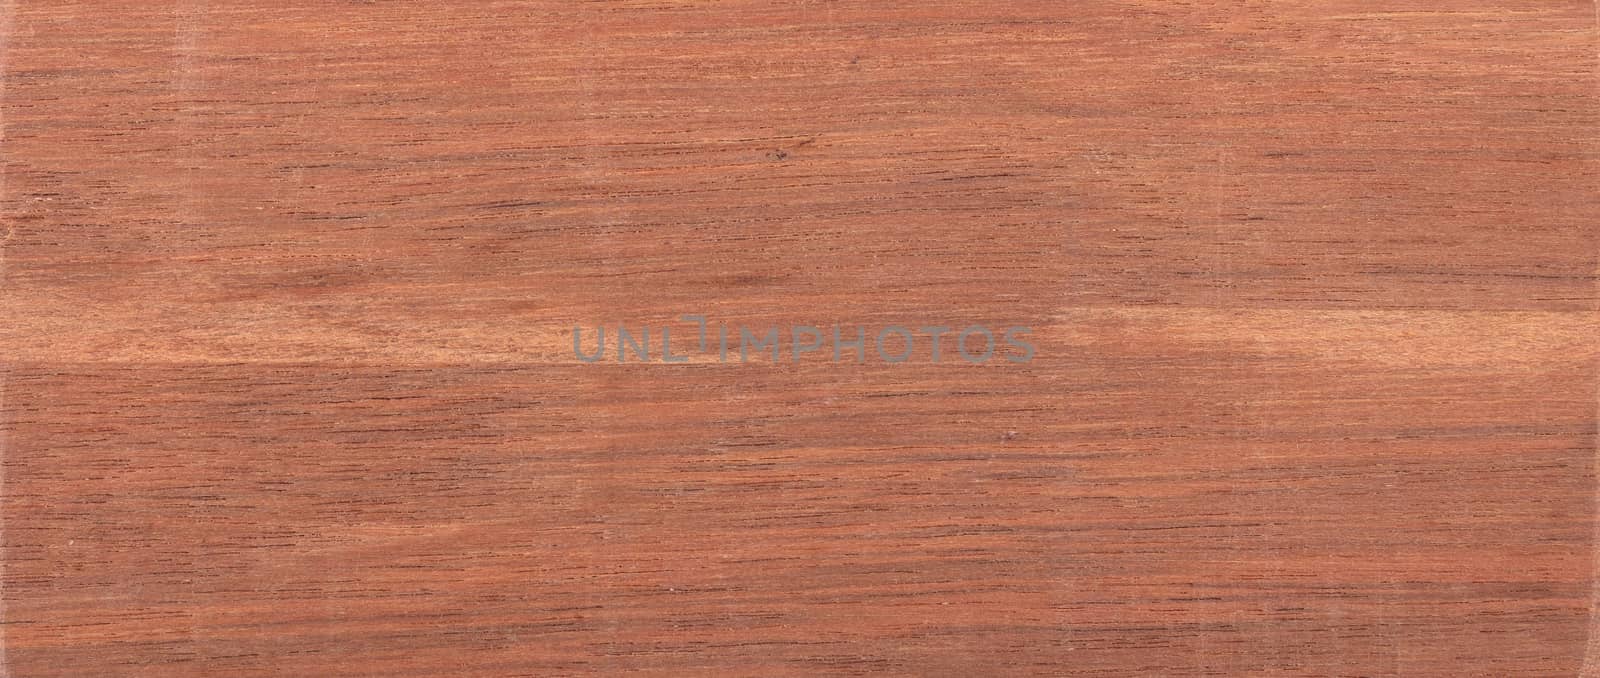 Wood background - Wood from the tropical rainforest - Suriname - Coupia glabra Aubl